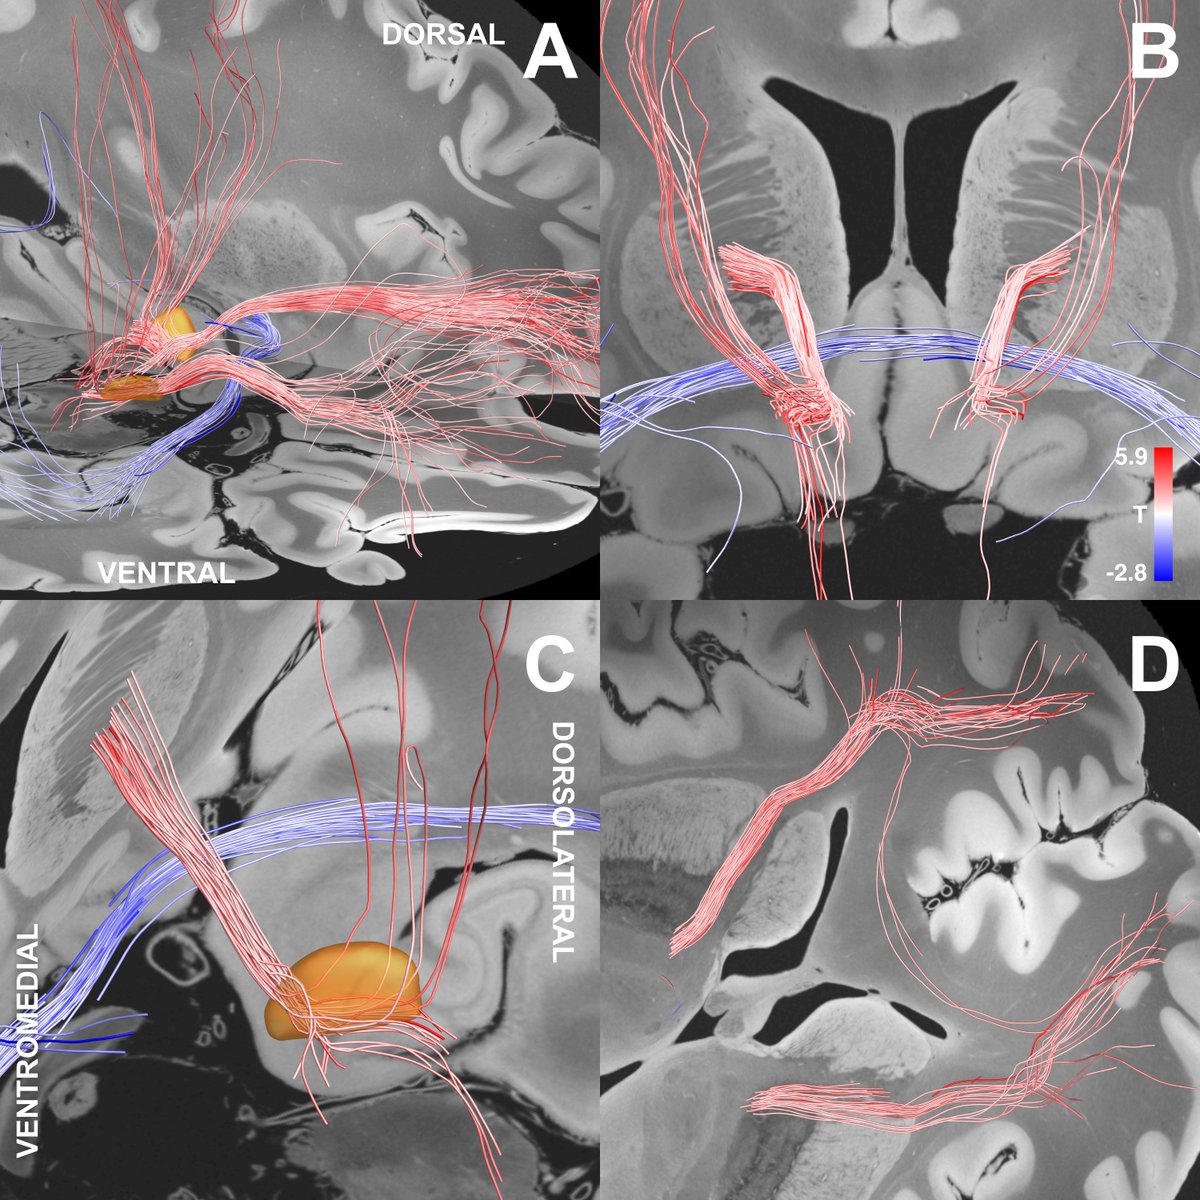 Second, the tract we isolated does indeed traverse exactly within the anteromedial STN. Again – this is using dMRI-tractography for anatomical conclusions and should not be overinterpreted.